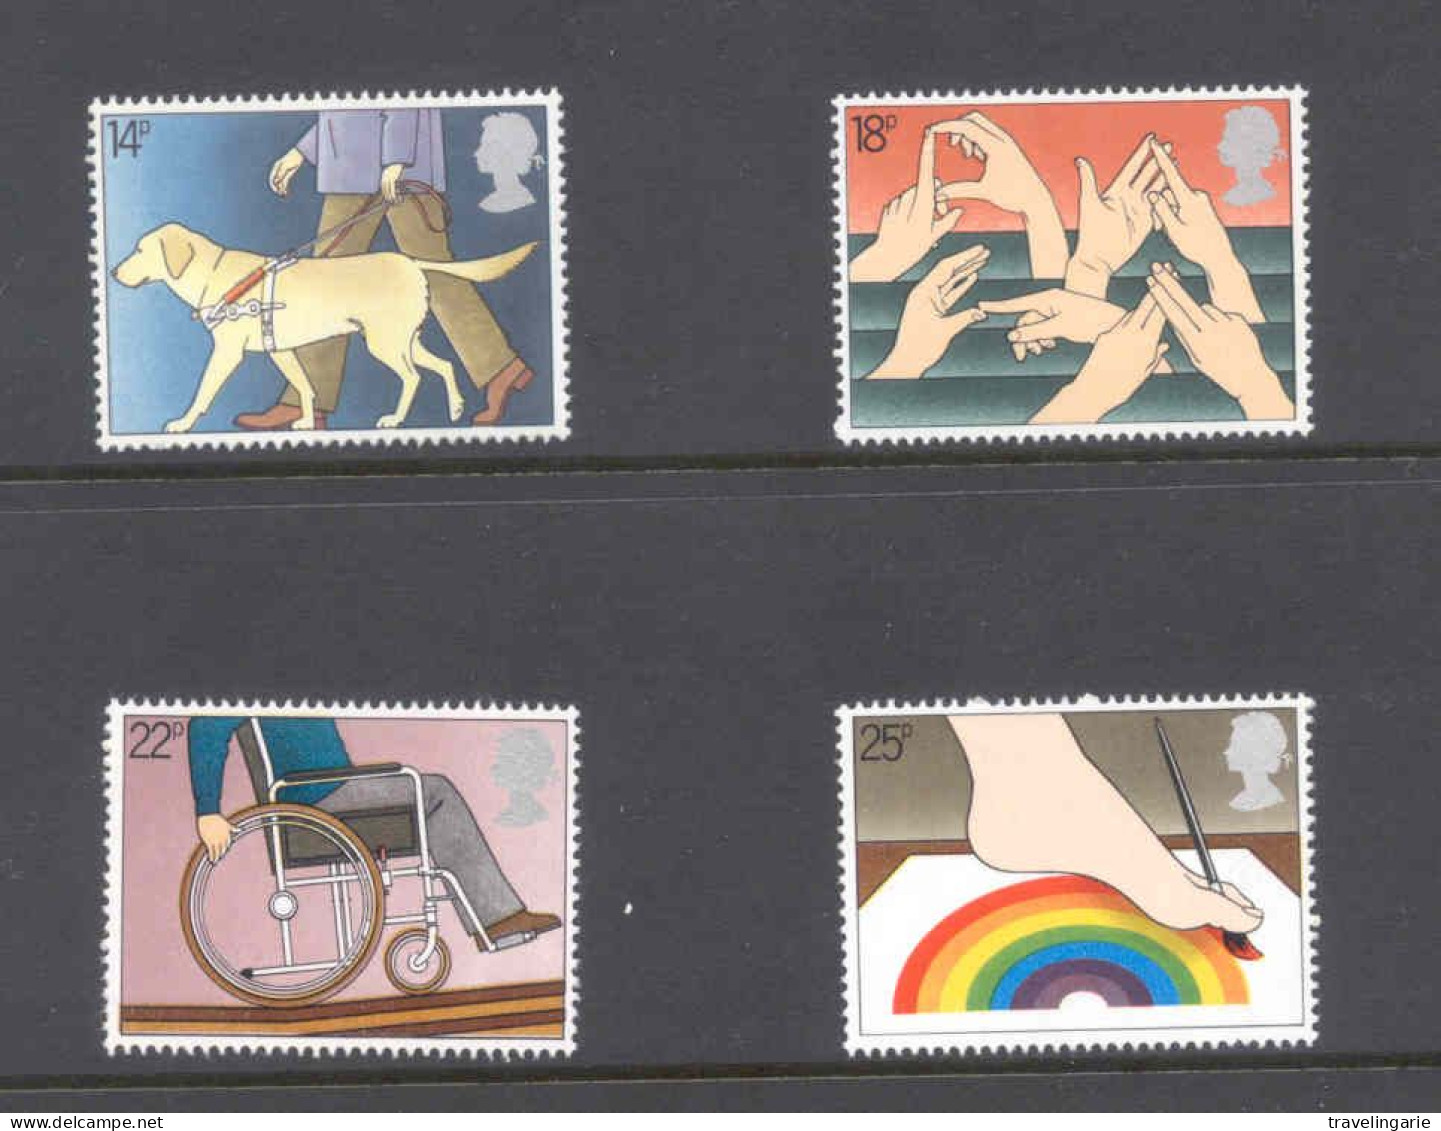 Great-Britain 1981 International Year Of The Disabled With Guide Dog MNH ** - Cani